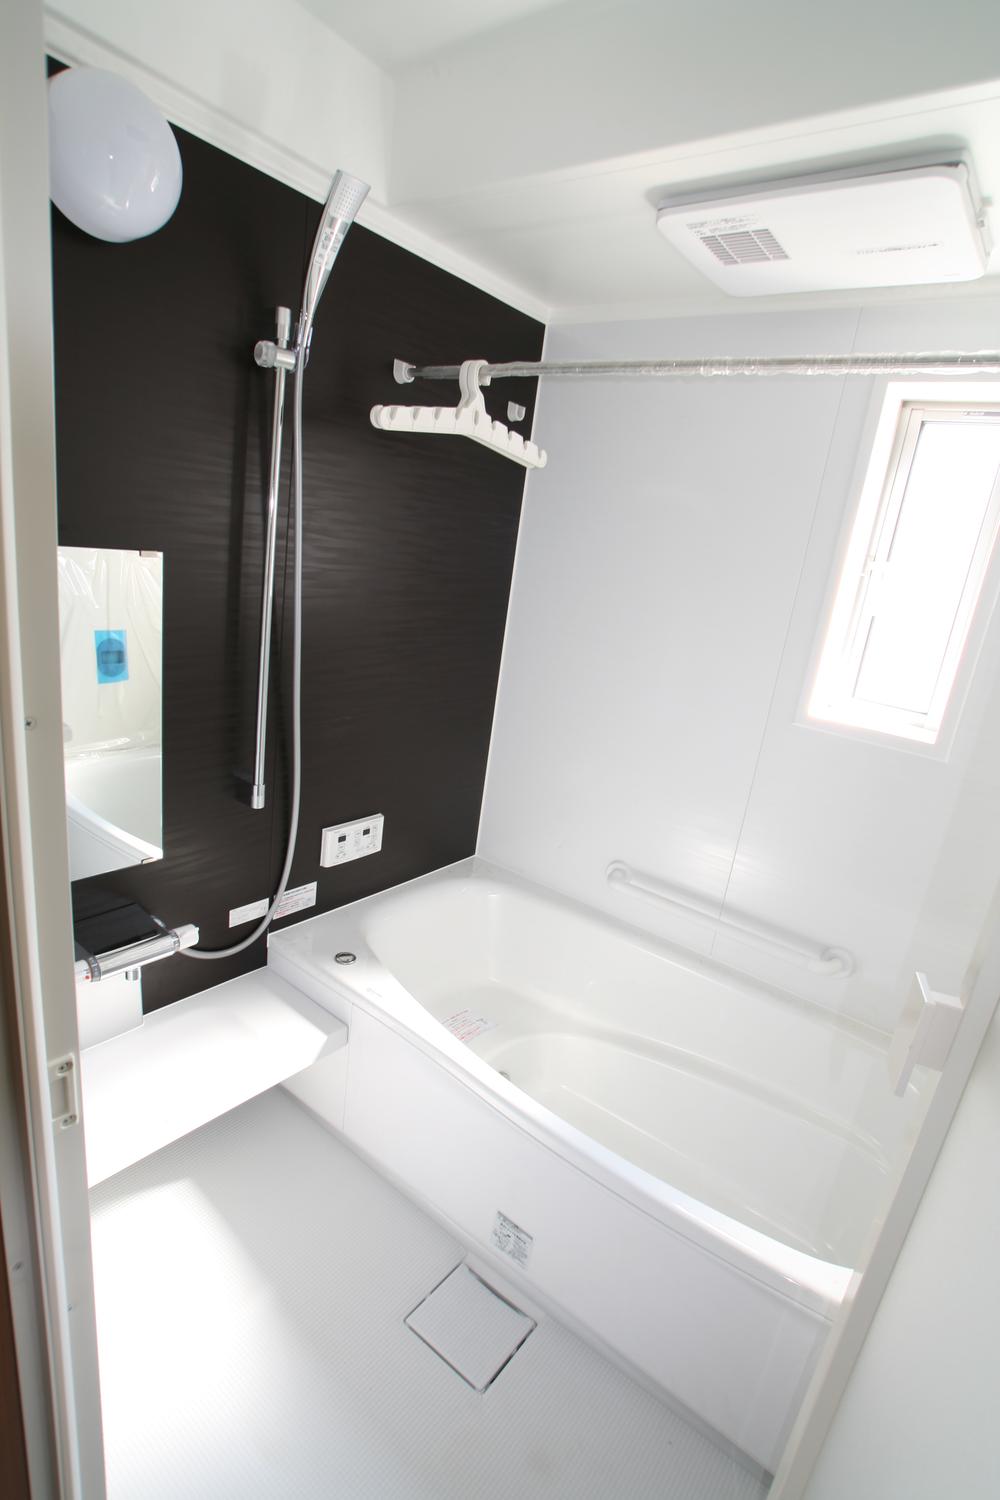 Same specifications photo (bathroom). The company construction example bathroom drying with heating machine drying of clothes in the (cool breeze with function) rainy season is drying function, Winter is warm in the heating, Summer is cool and comfortable bath time in the cool breeze. Large bathtub.